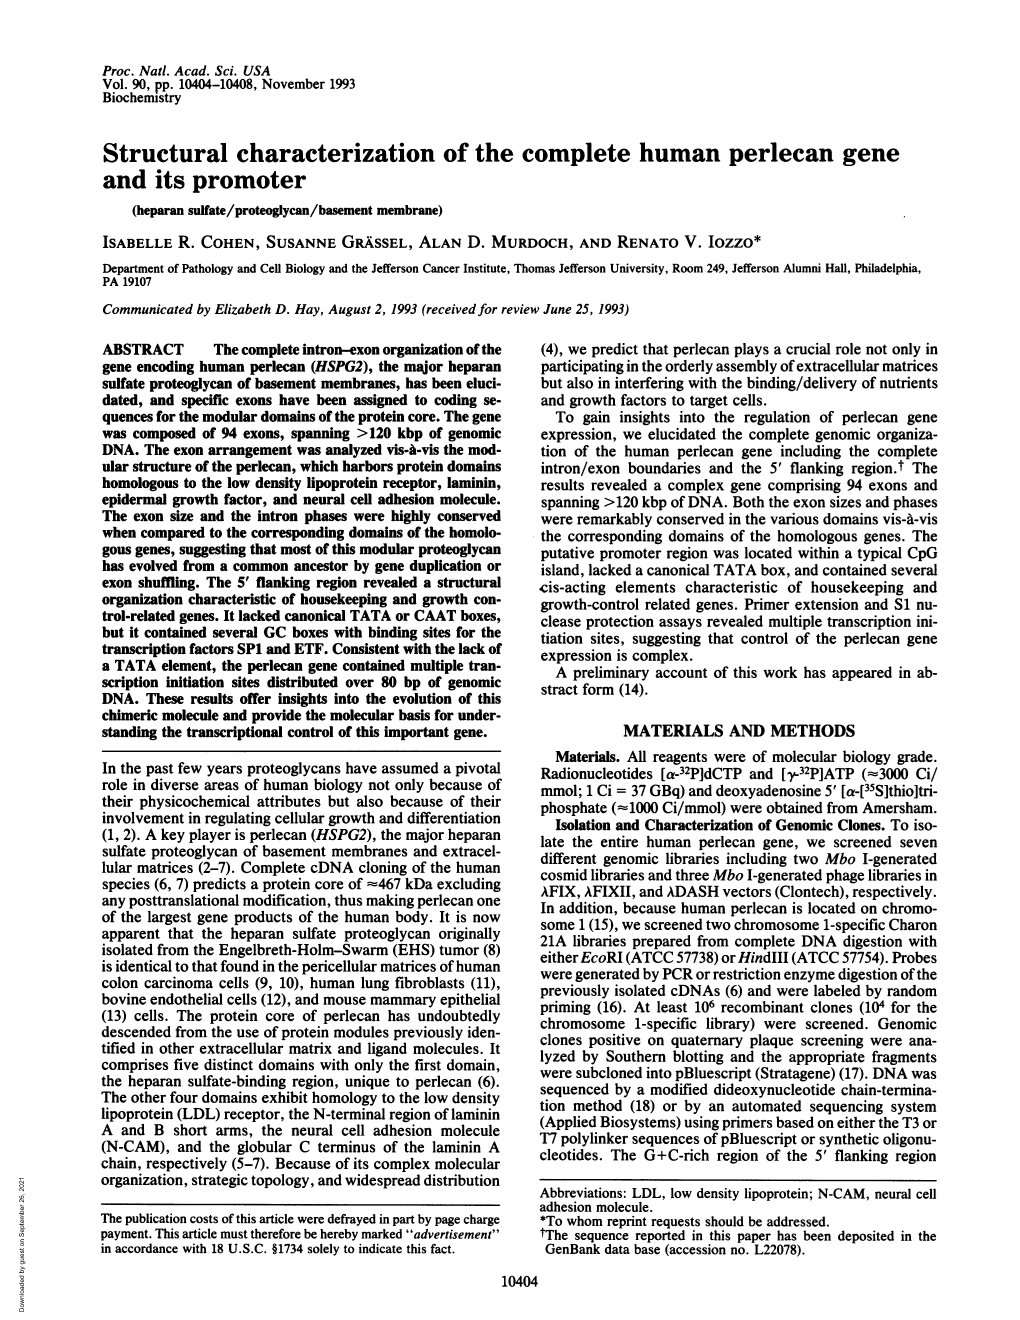 Structural Characterization of the Complete Human Perlecan Gene and Its Promoter (Heparan Sulfate/Proteoglycan/Basement Membrane) ISABELLE R